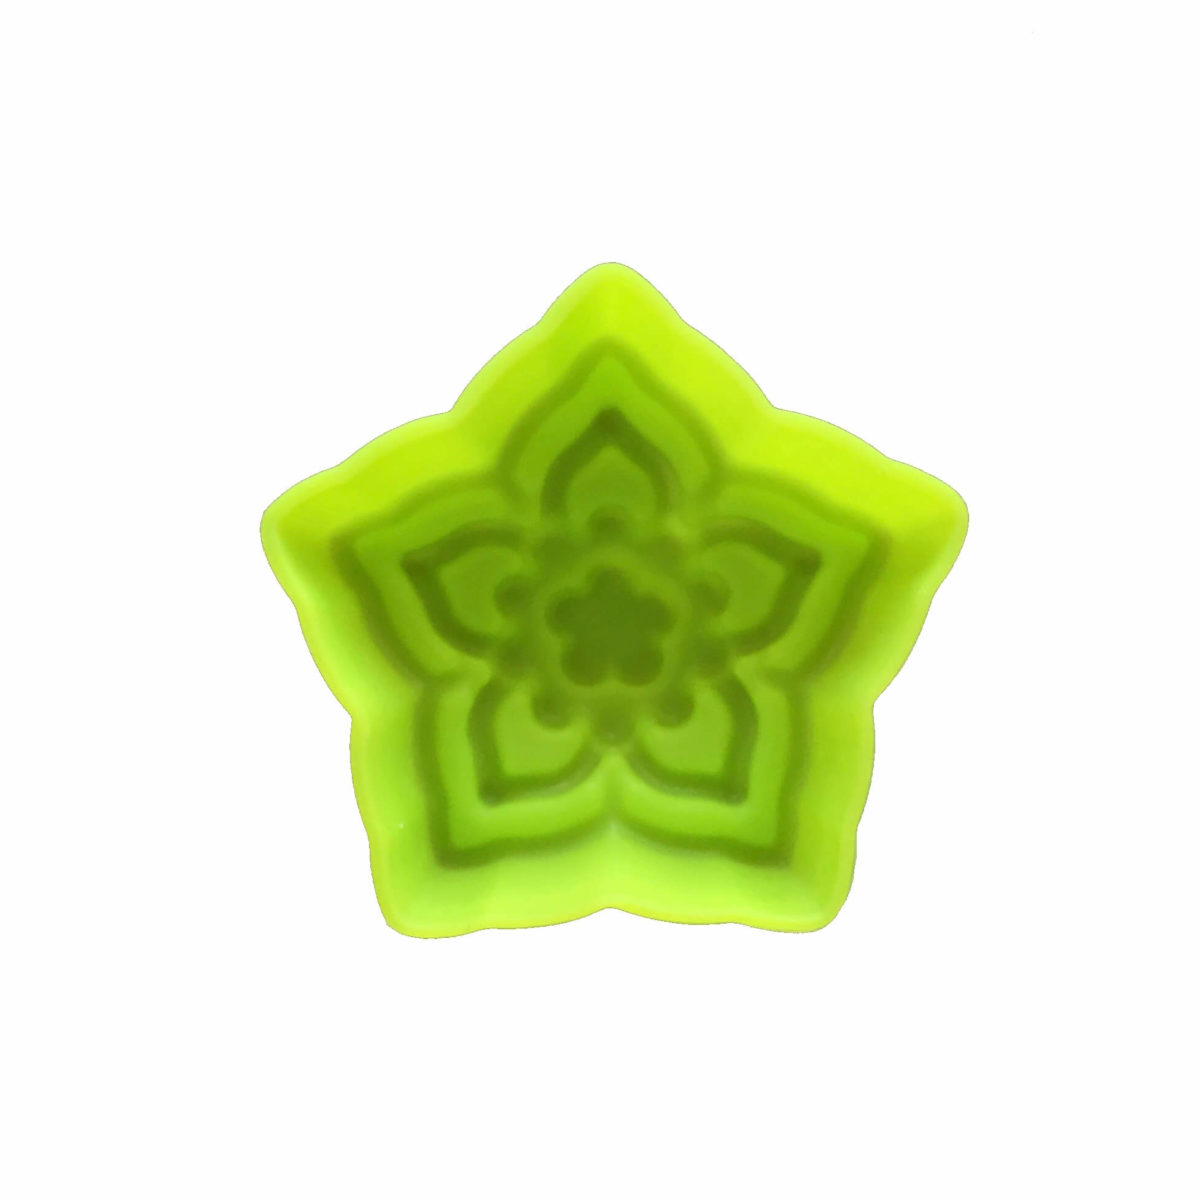 back of 5cm green star jasmine flower single cavity silicone mould